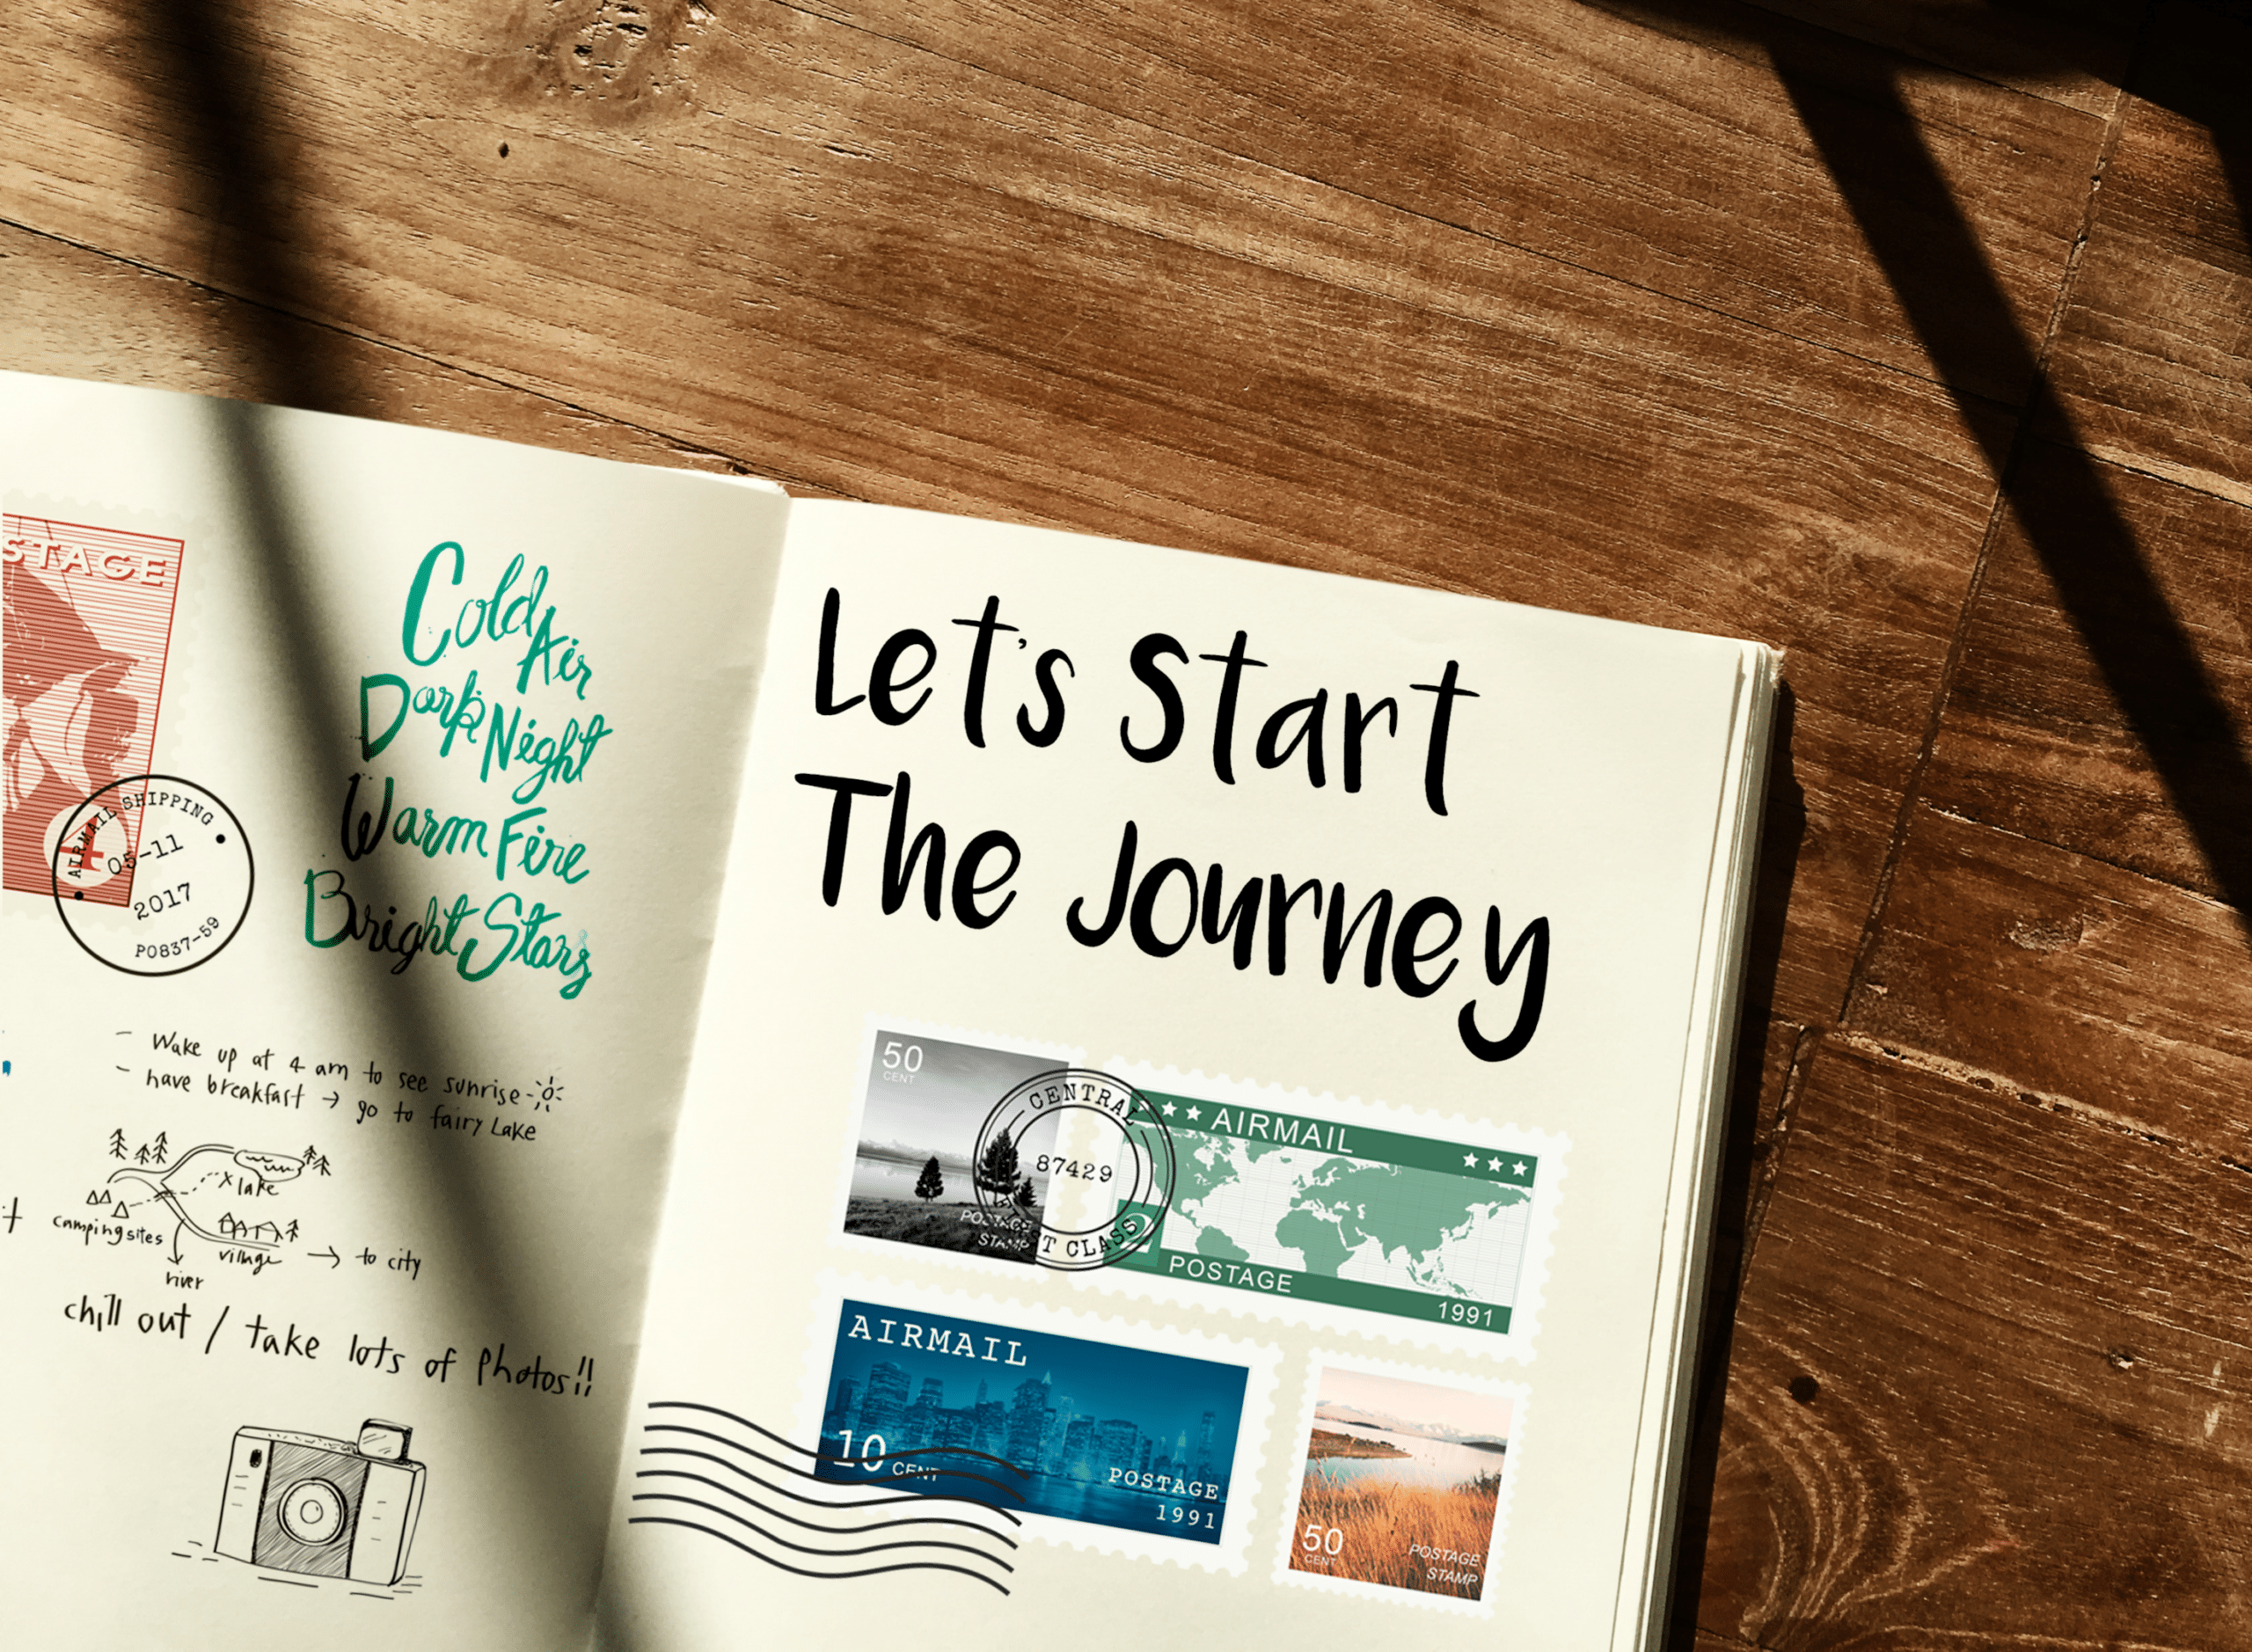 Brand story and journey